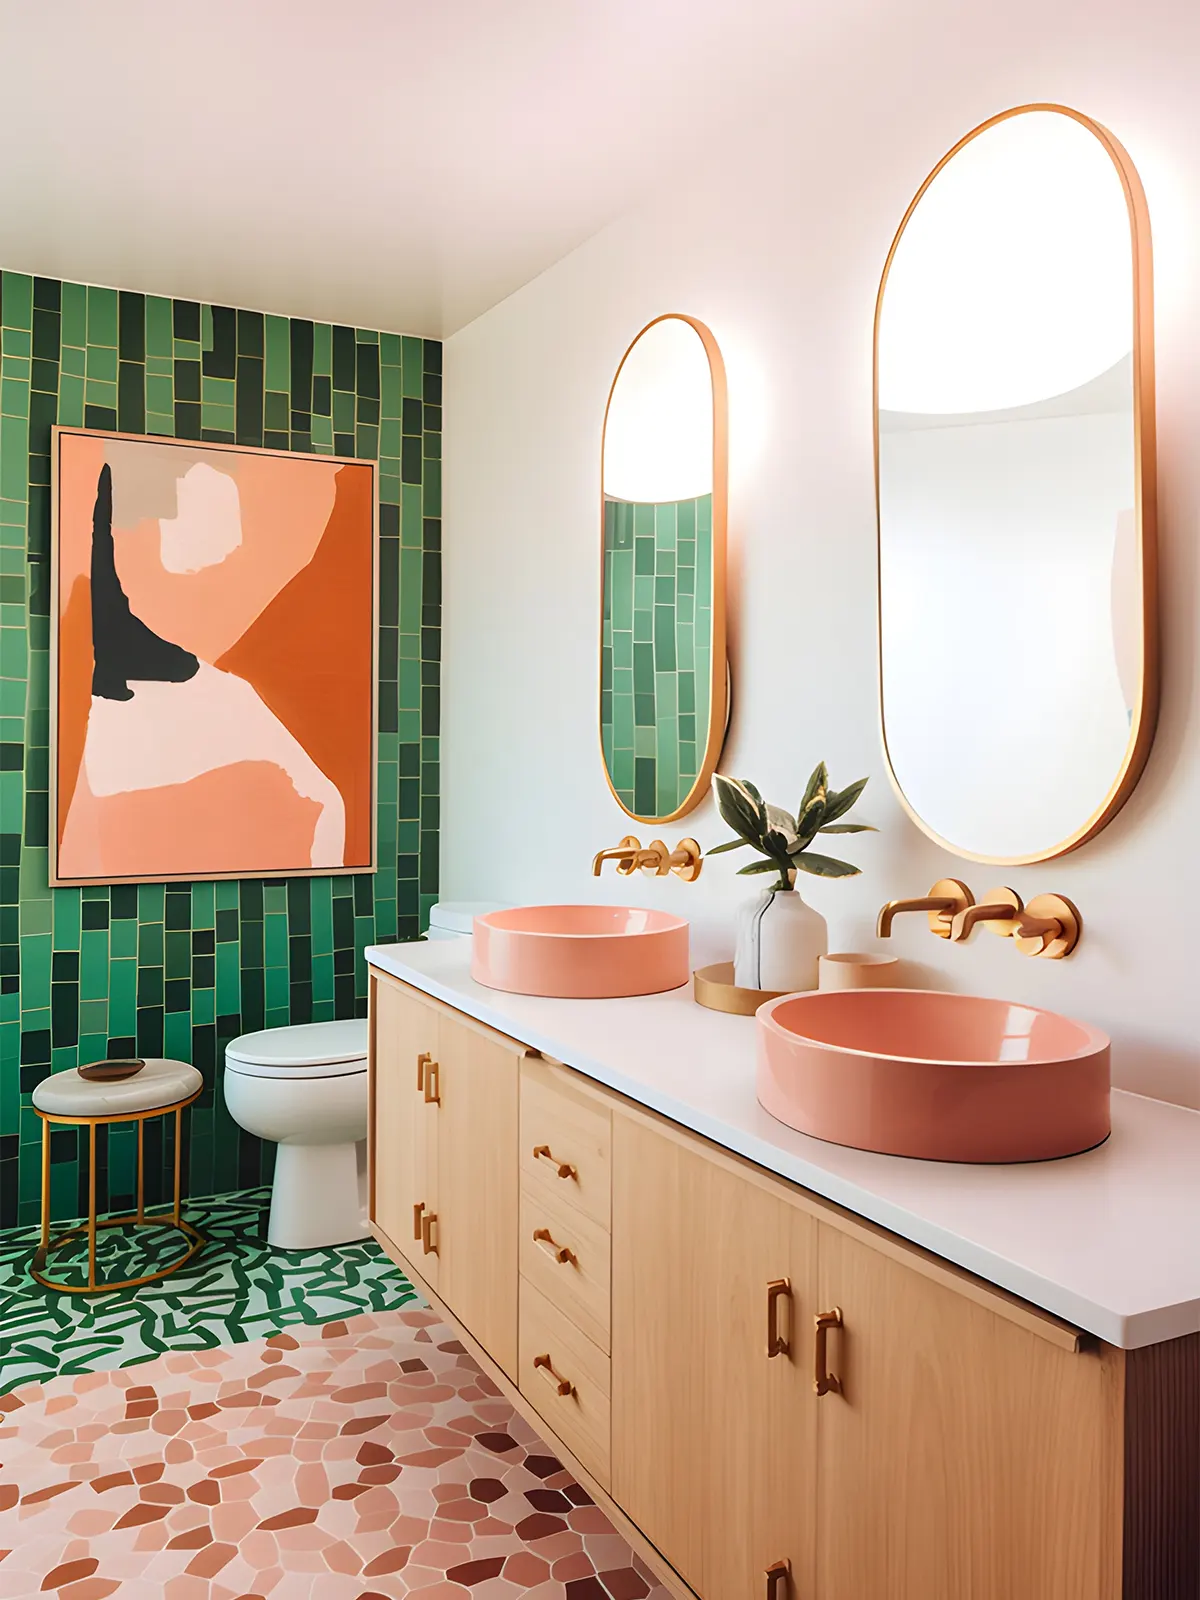 A bathroom with a pink and green tiled wall.